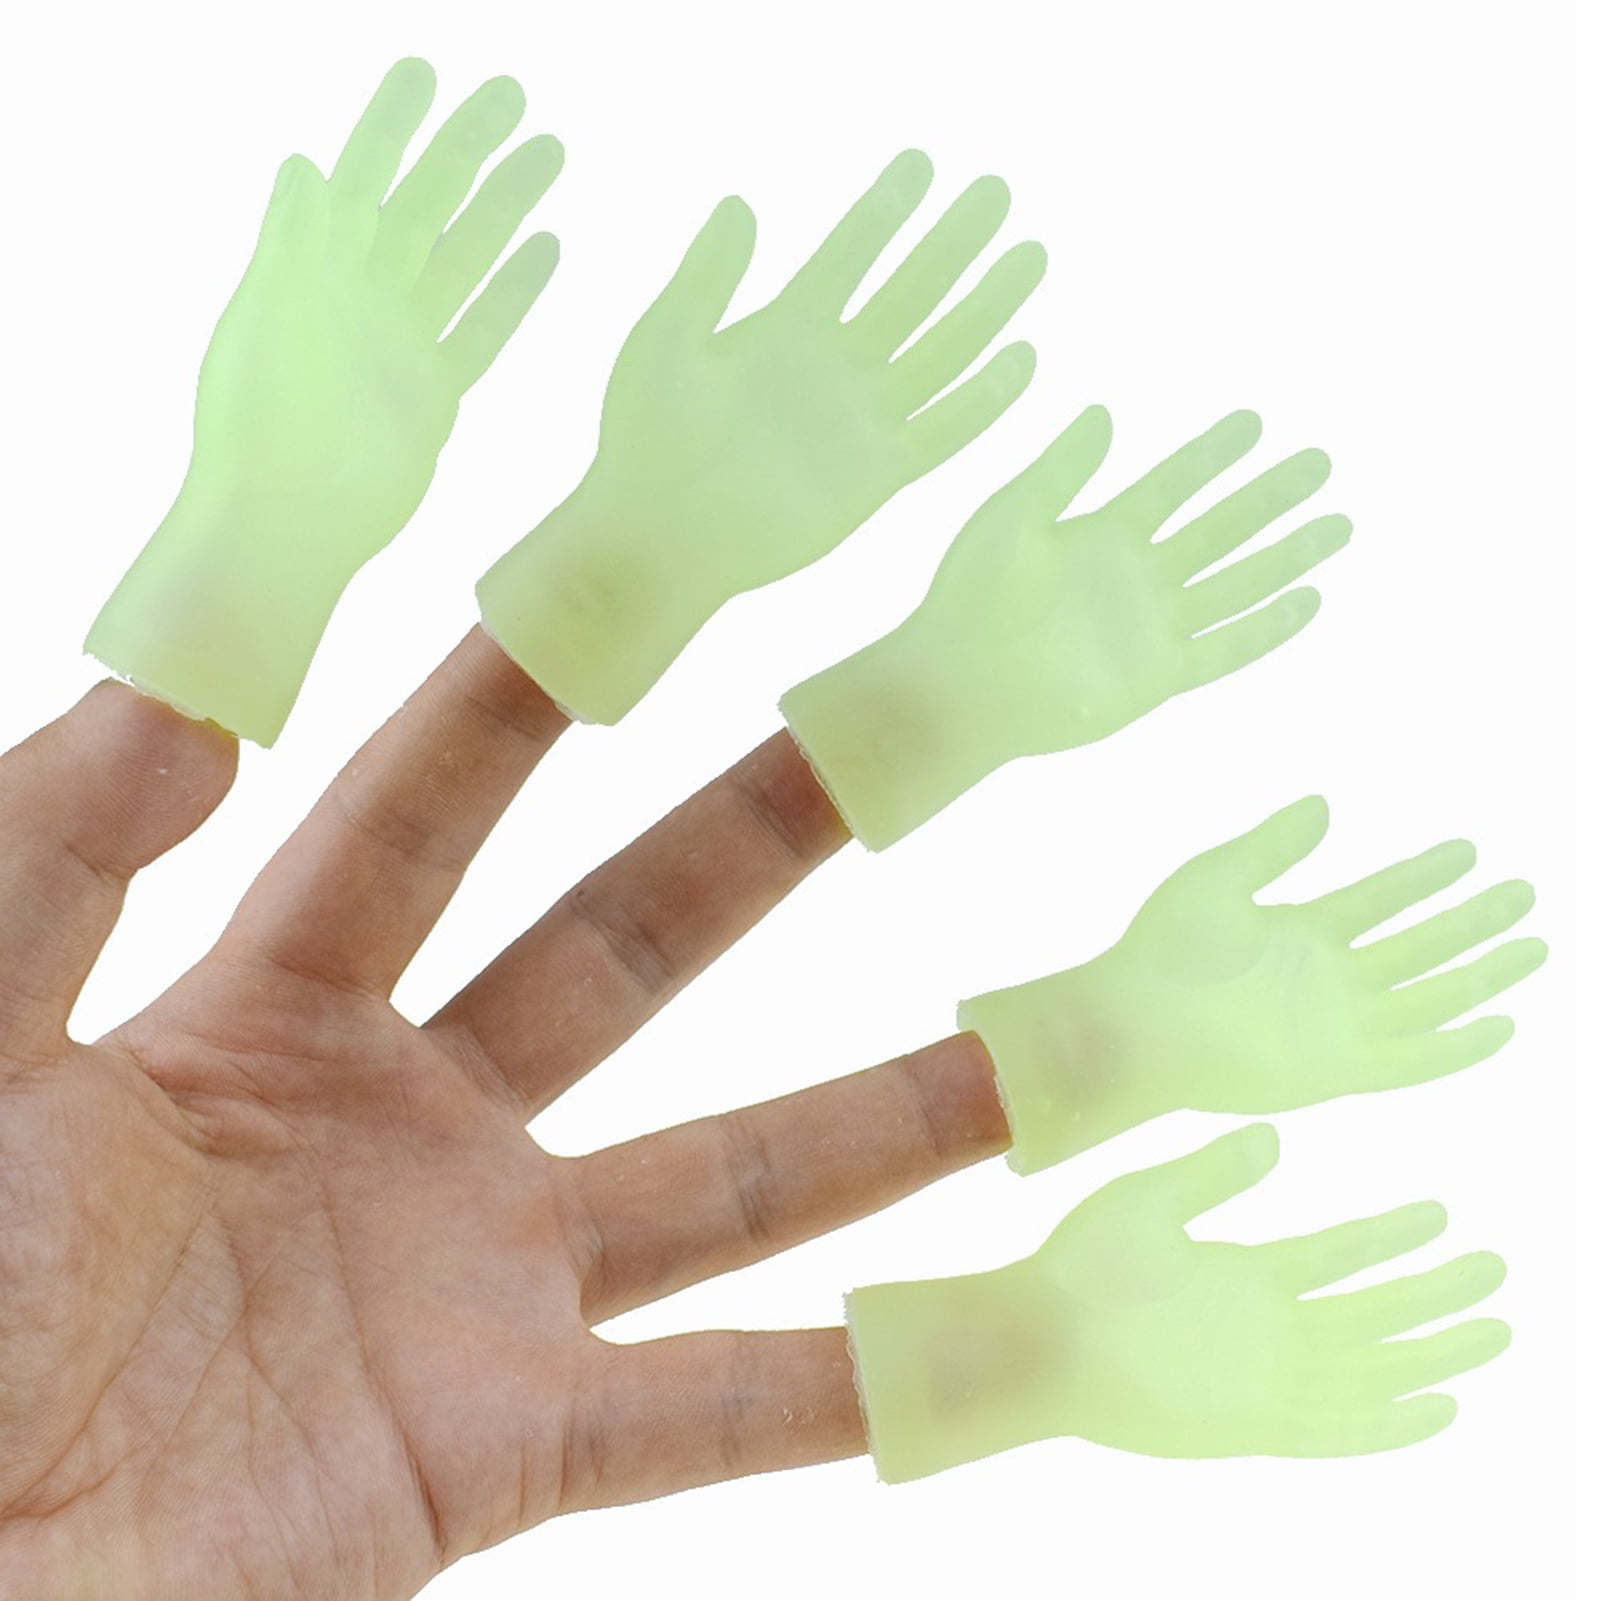 show original title Details about   2St Funny Simulation Left Right Mini Hands Finger Sleeves Toy S2D8